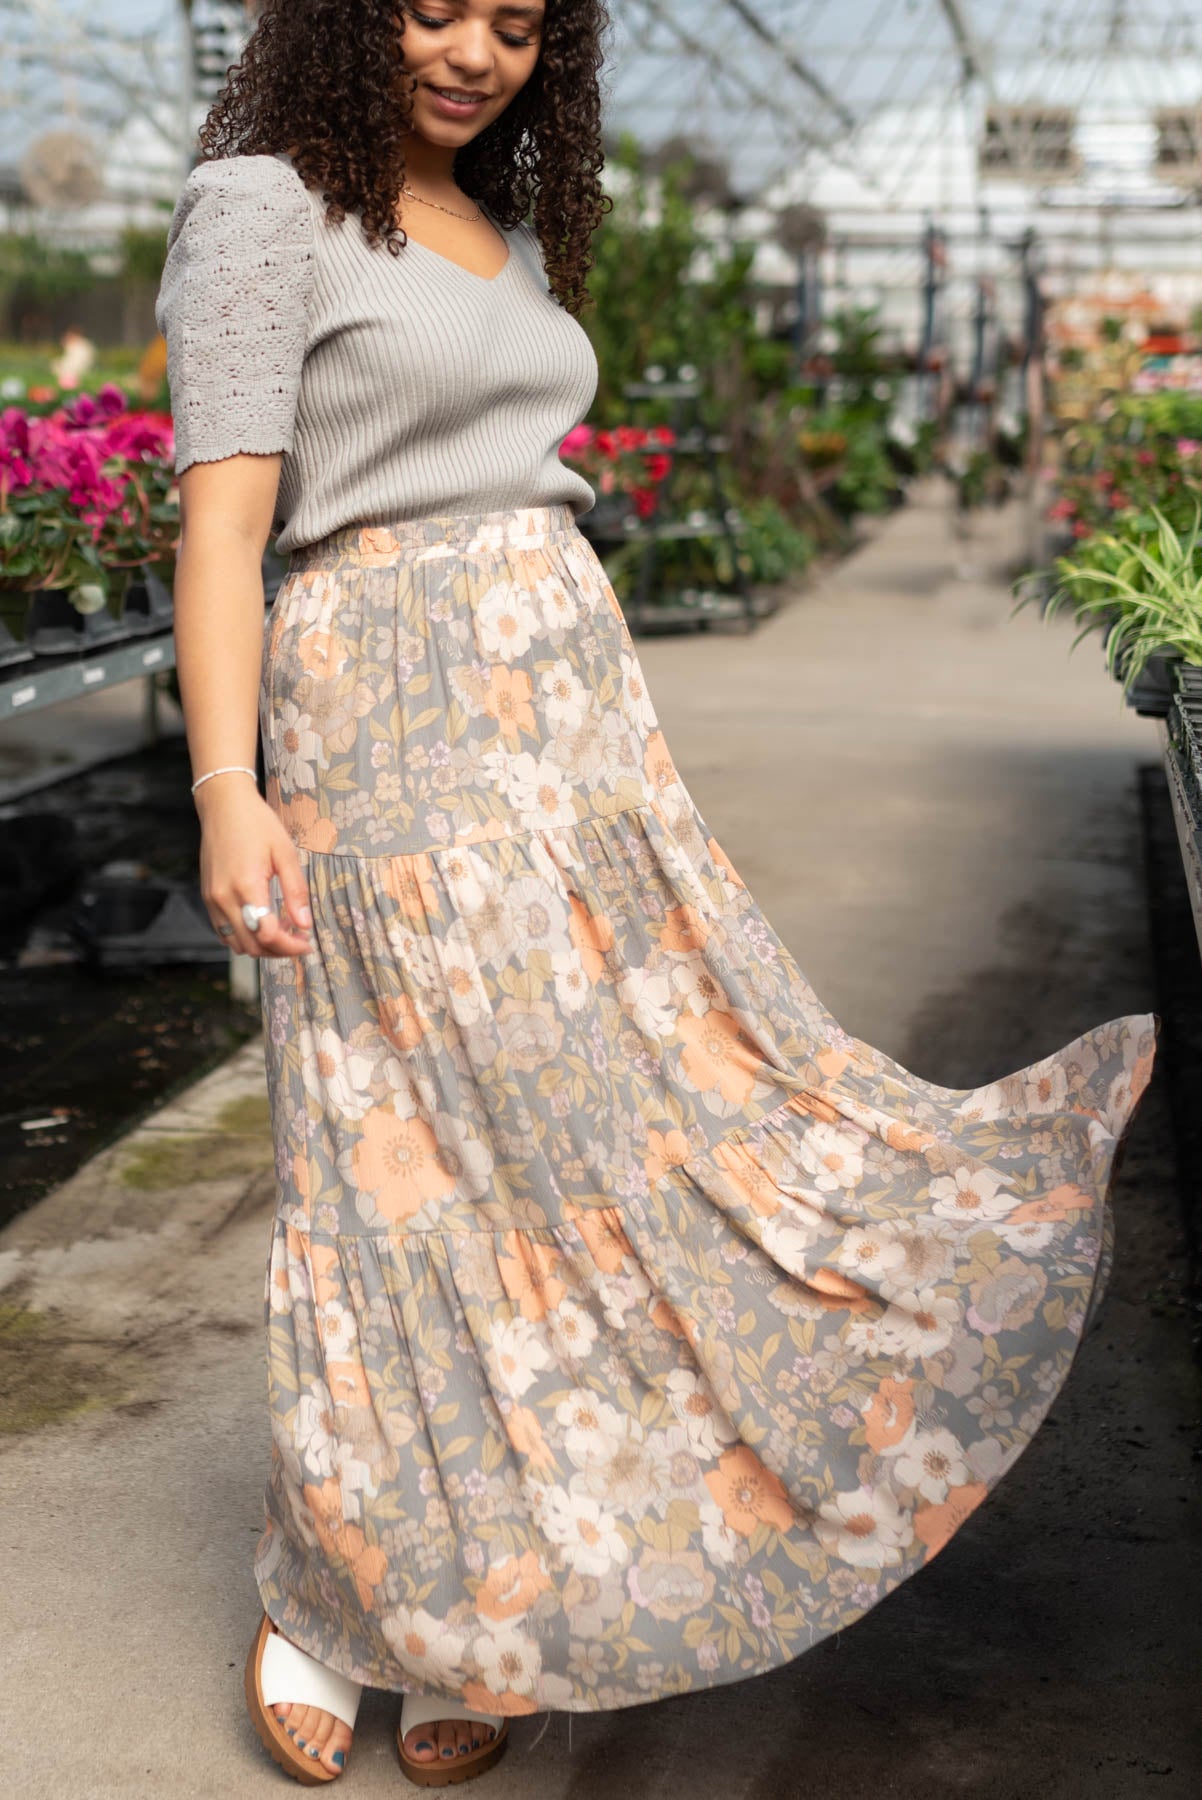 Grey floral skirt with ivory and peach flowers